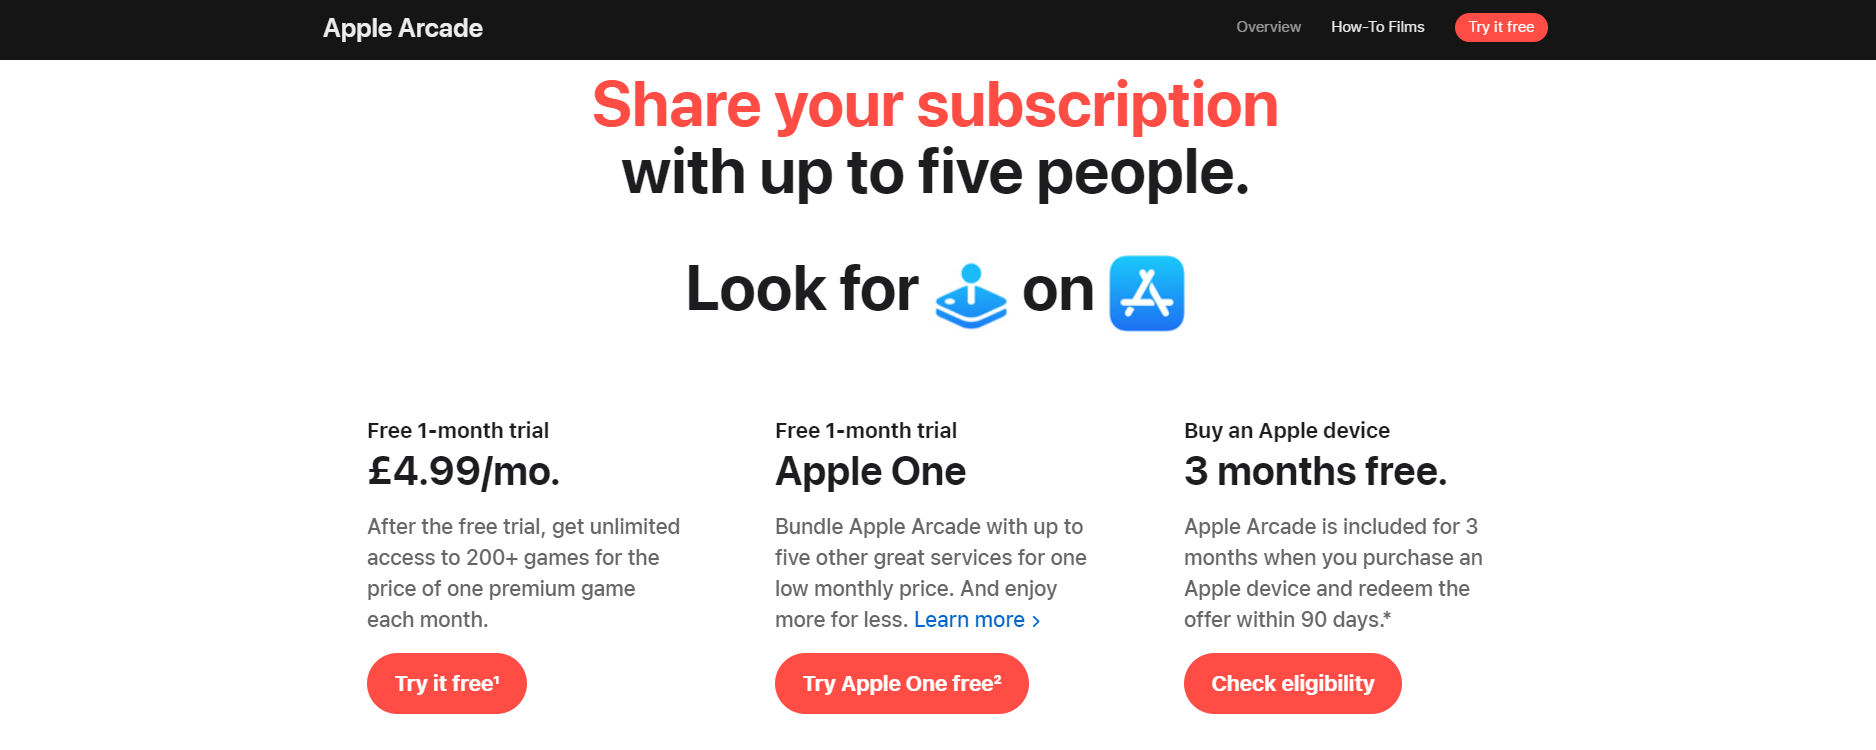 Apple Arcade Subscriptions With Features Included in Plans